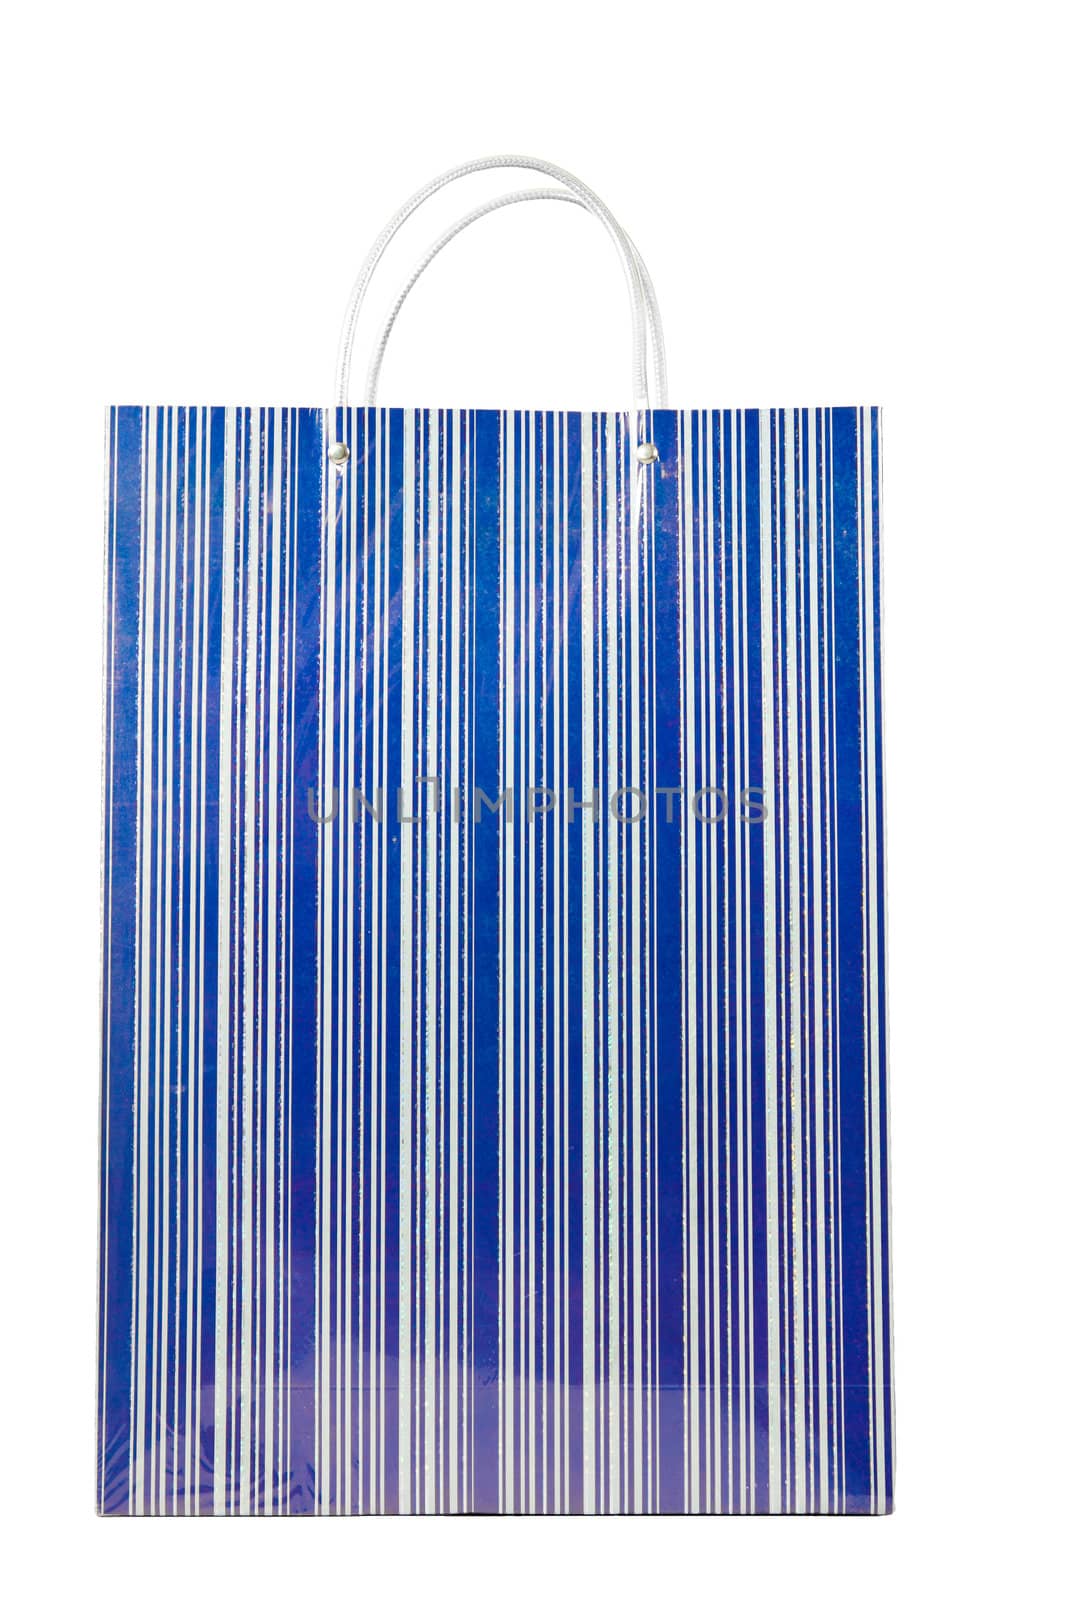 A fancy blue striped shopping bag isolated over white.